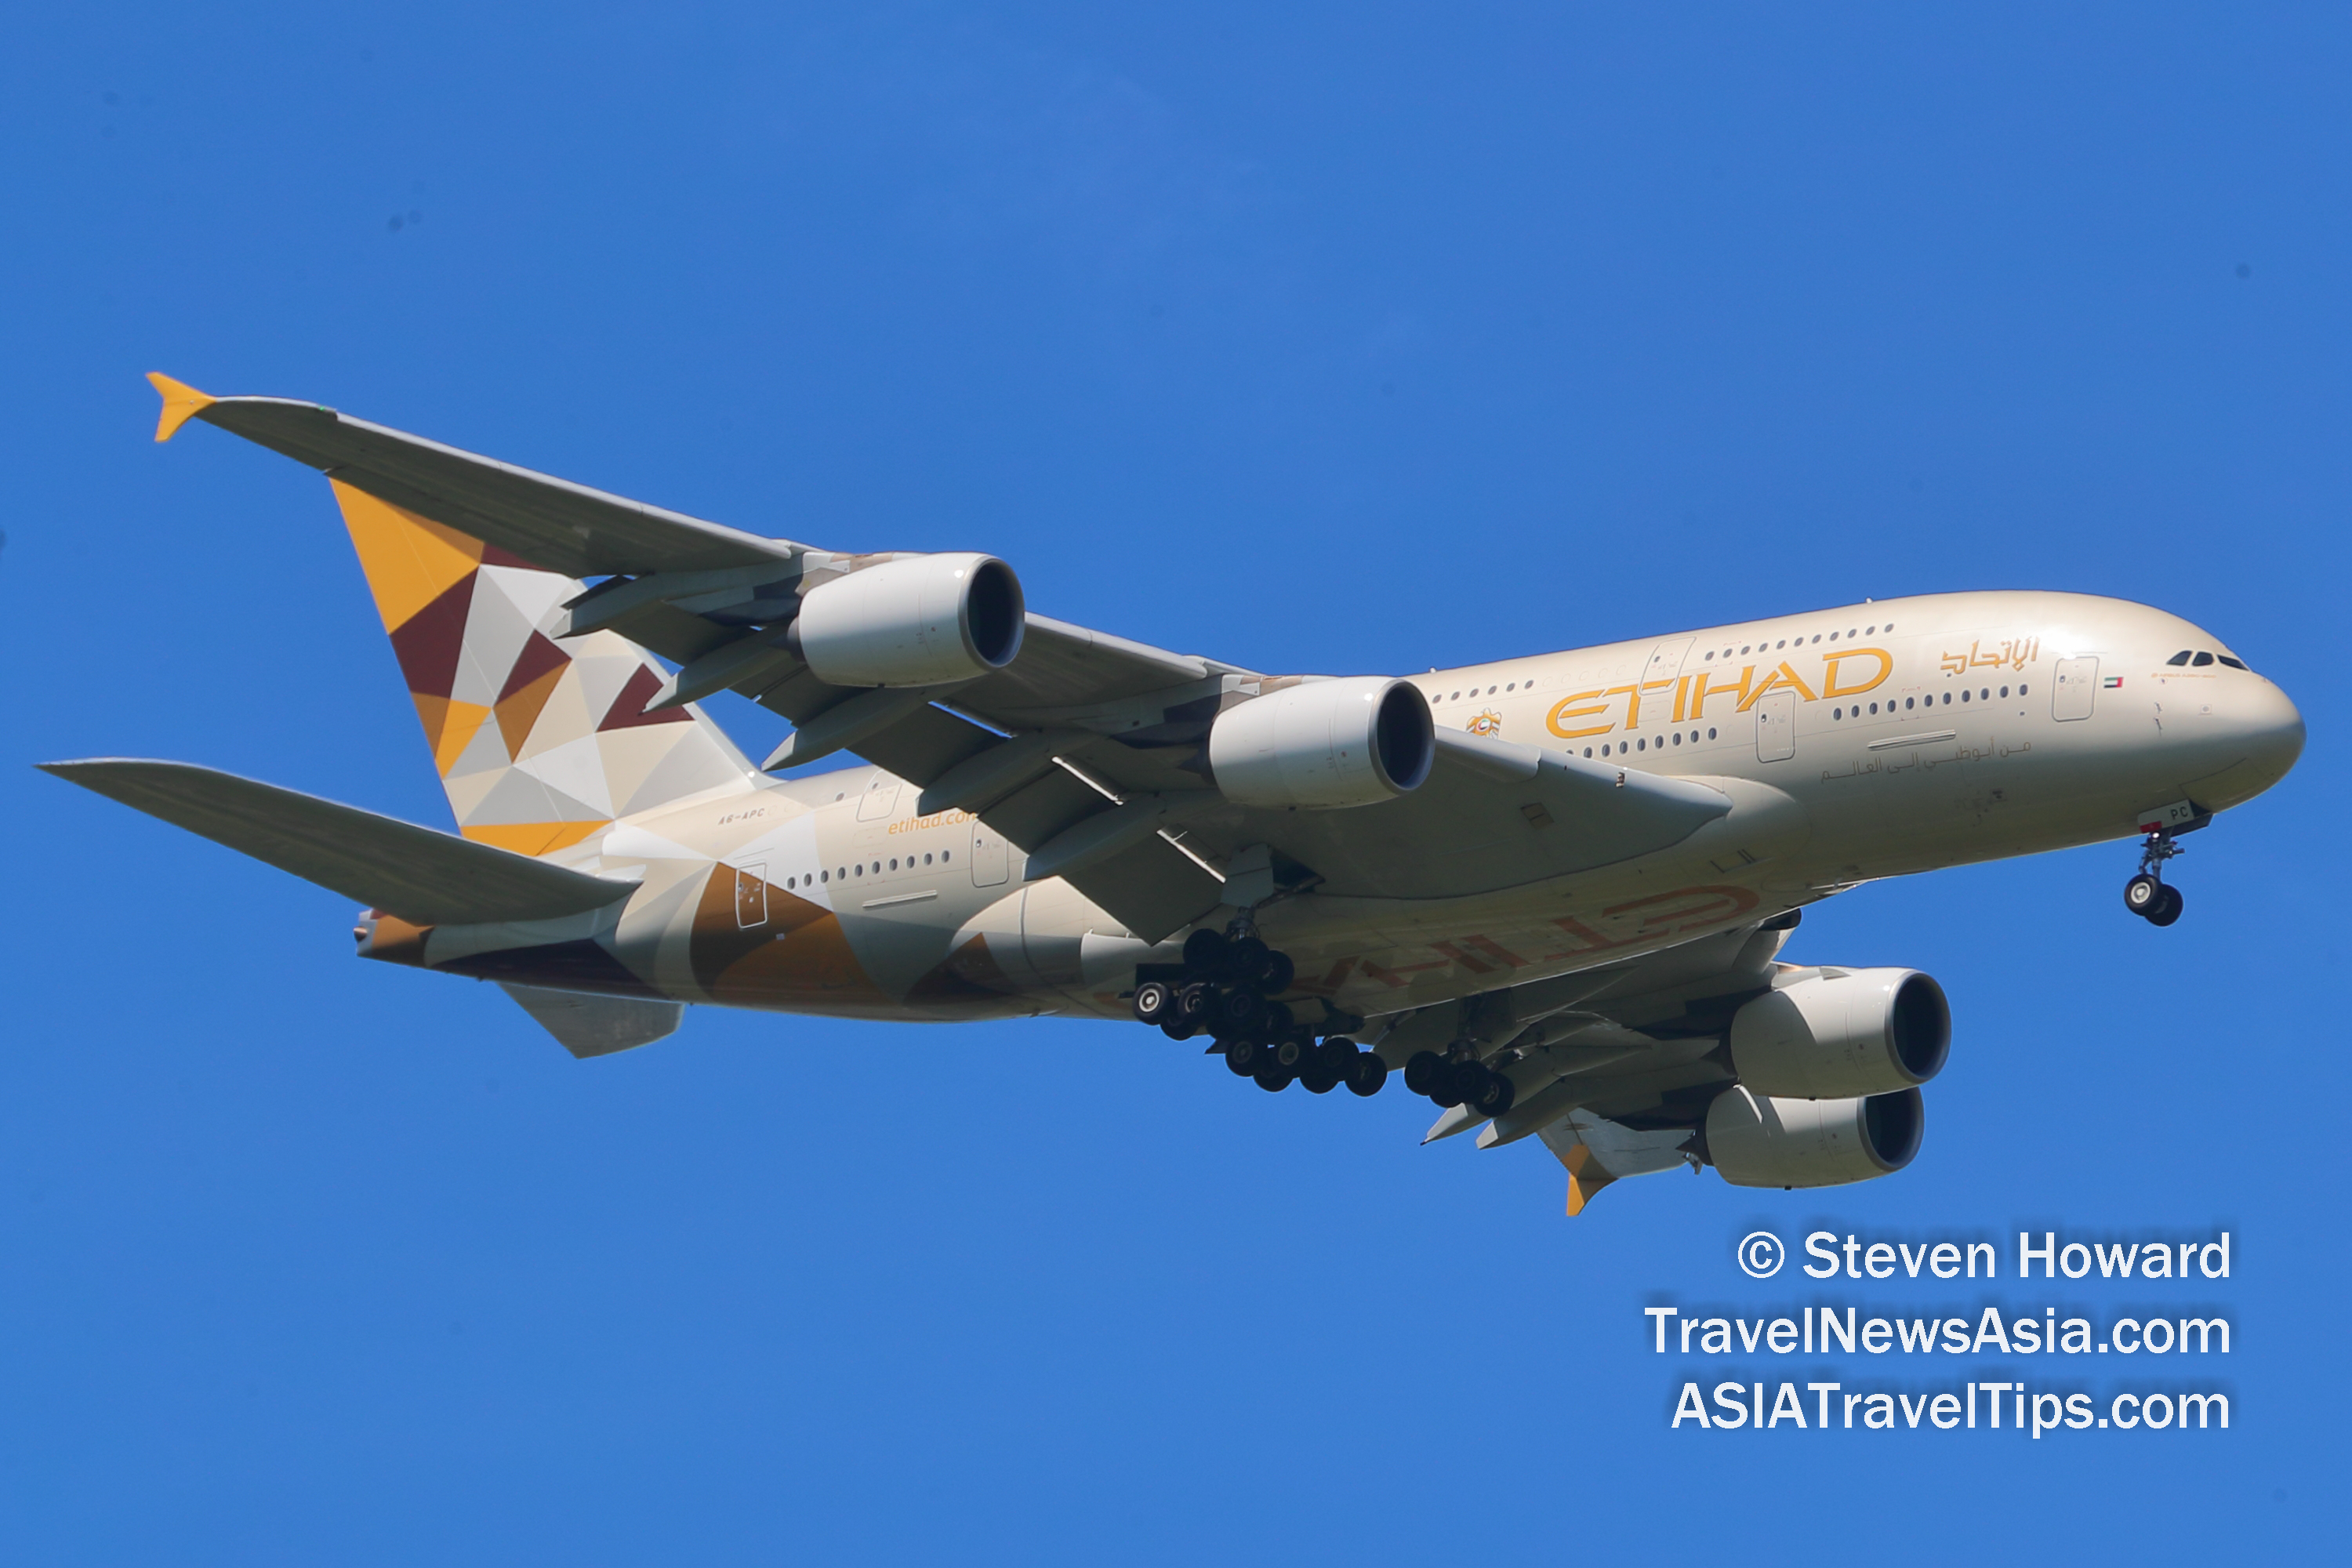 Etihad Airways A380 reg: A6-APC. Picture by Steven Howard of TravelNewsAsia.com Click to enlarge.